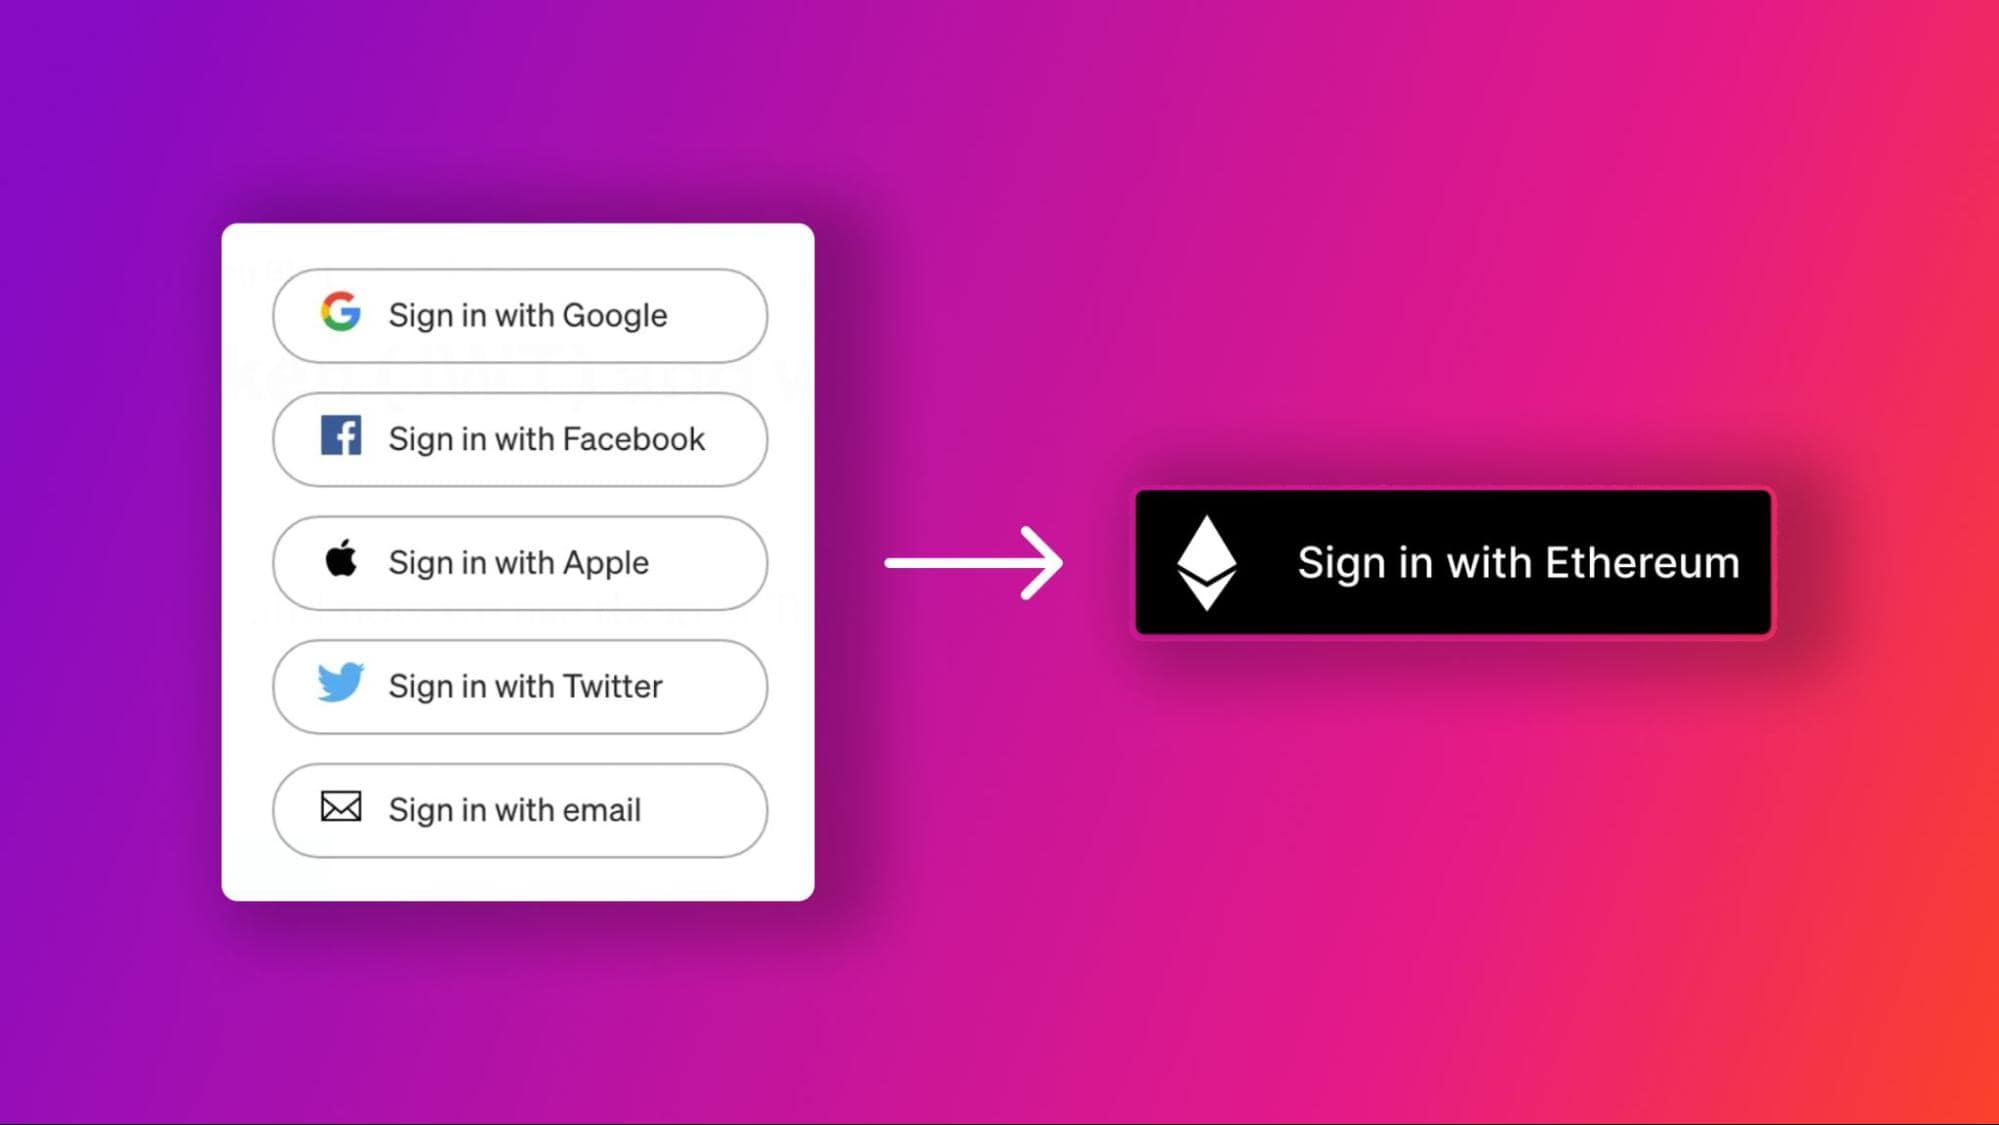 A 'Sign in with Ethereum' option is shown next to a list of traditional sign-in methods.